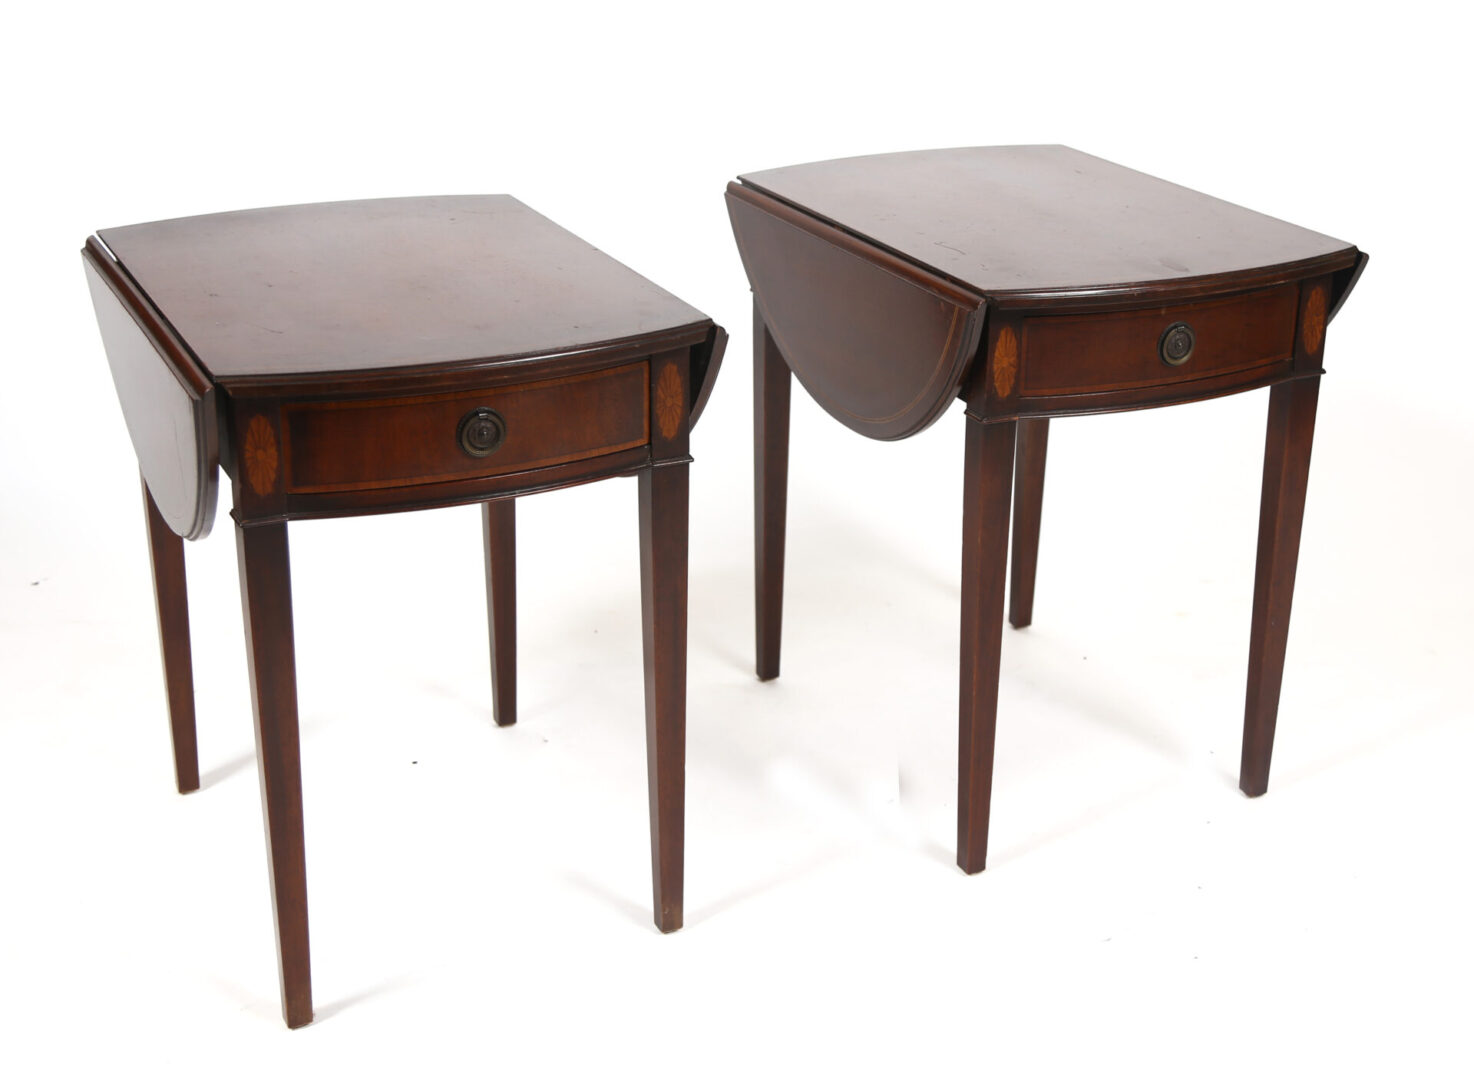 A pair of tables with one drawer and two legs.